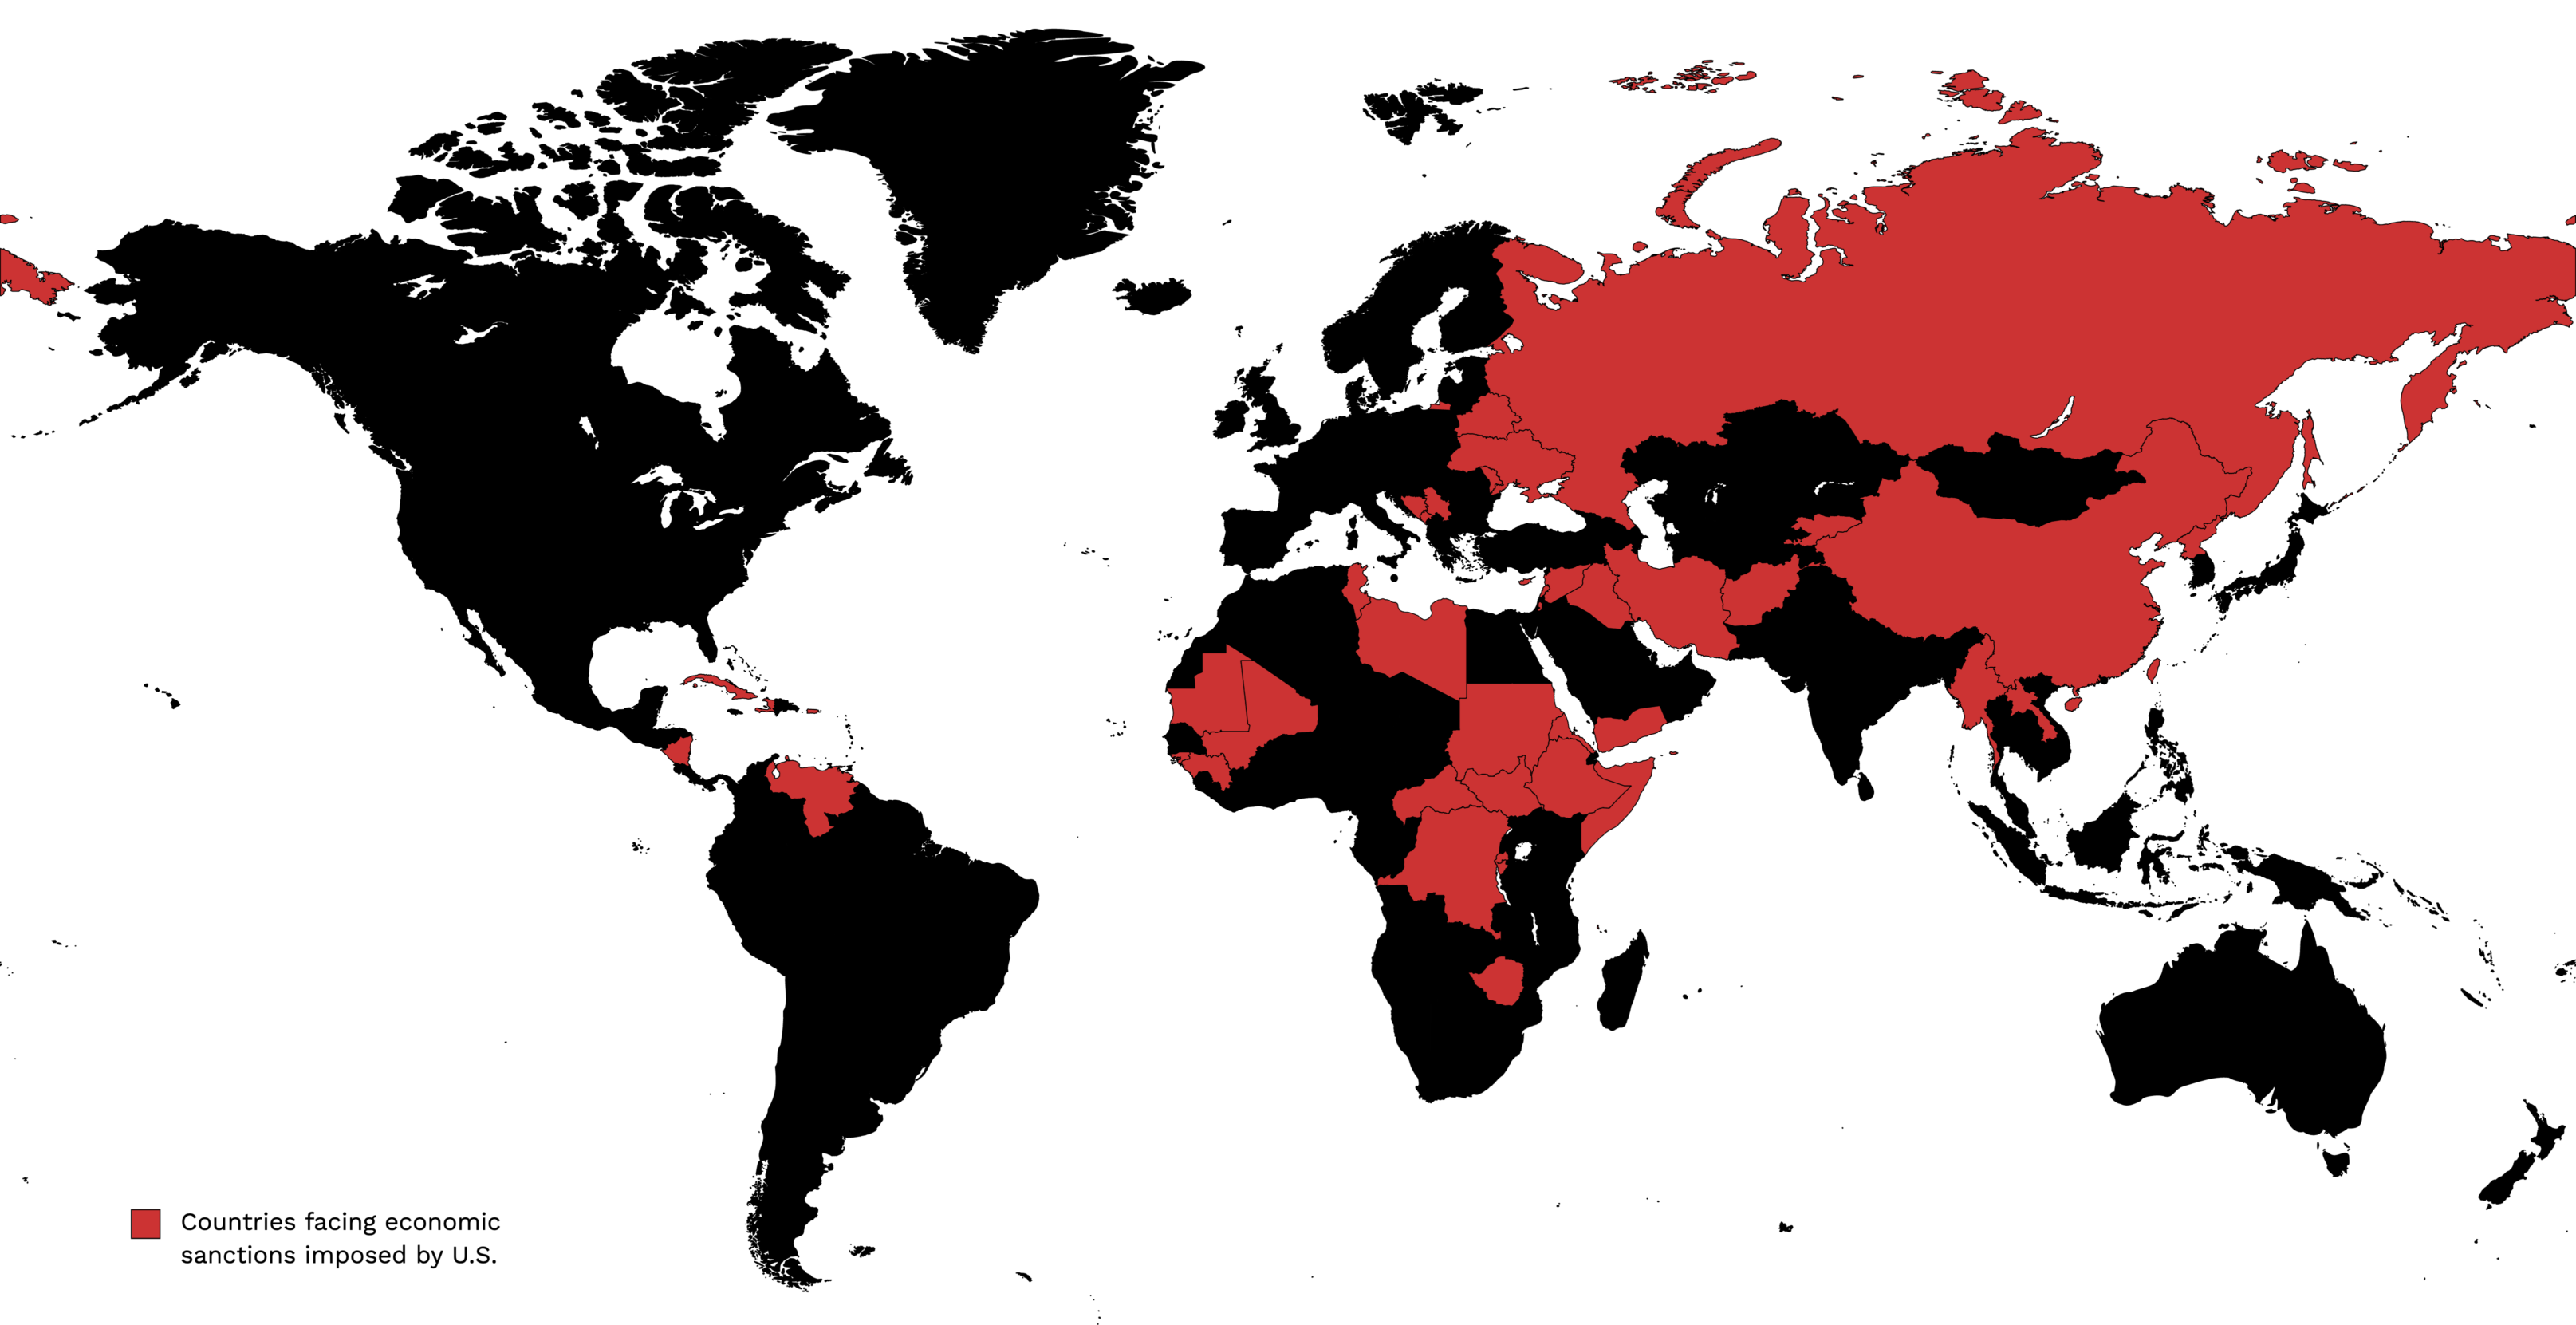 File:Economic sanctions map by SanctionsKill.org.png